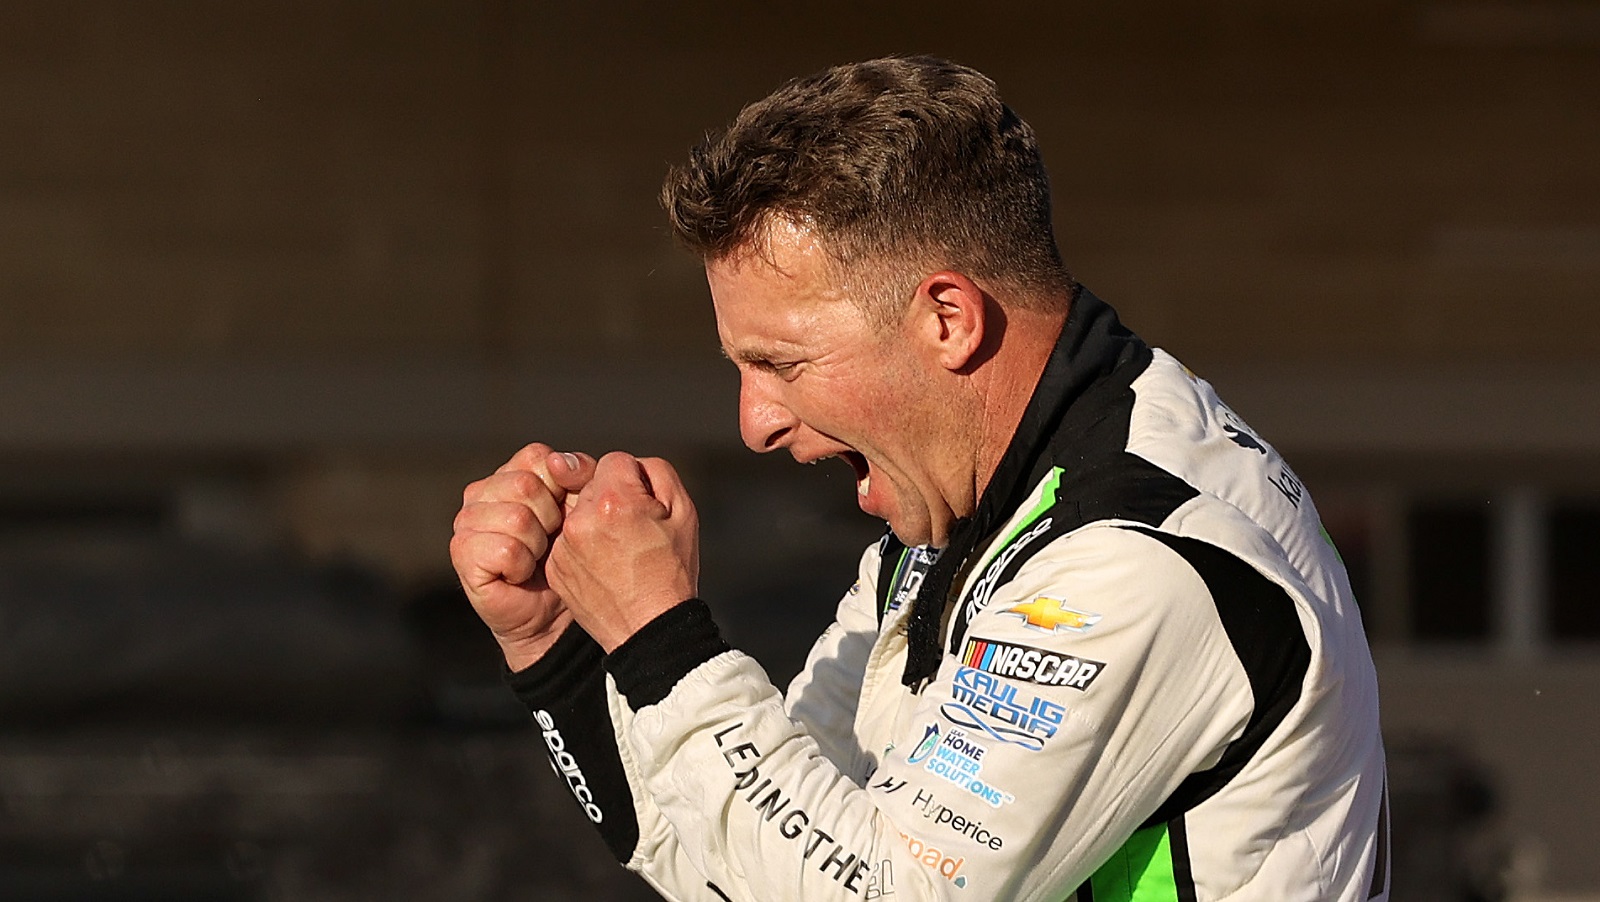 AJ Allmendinger celebrates after winning the NASCAR Xfinity Series Pit Boss 250 at Circuit of The Americas on March 26, 2022 in Austin, Texas.